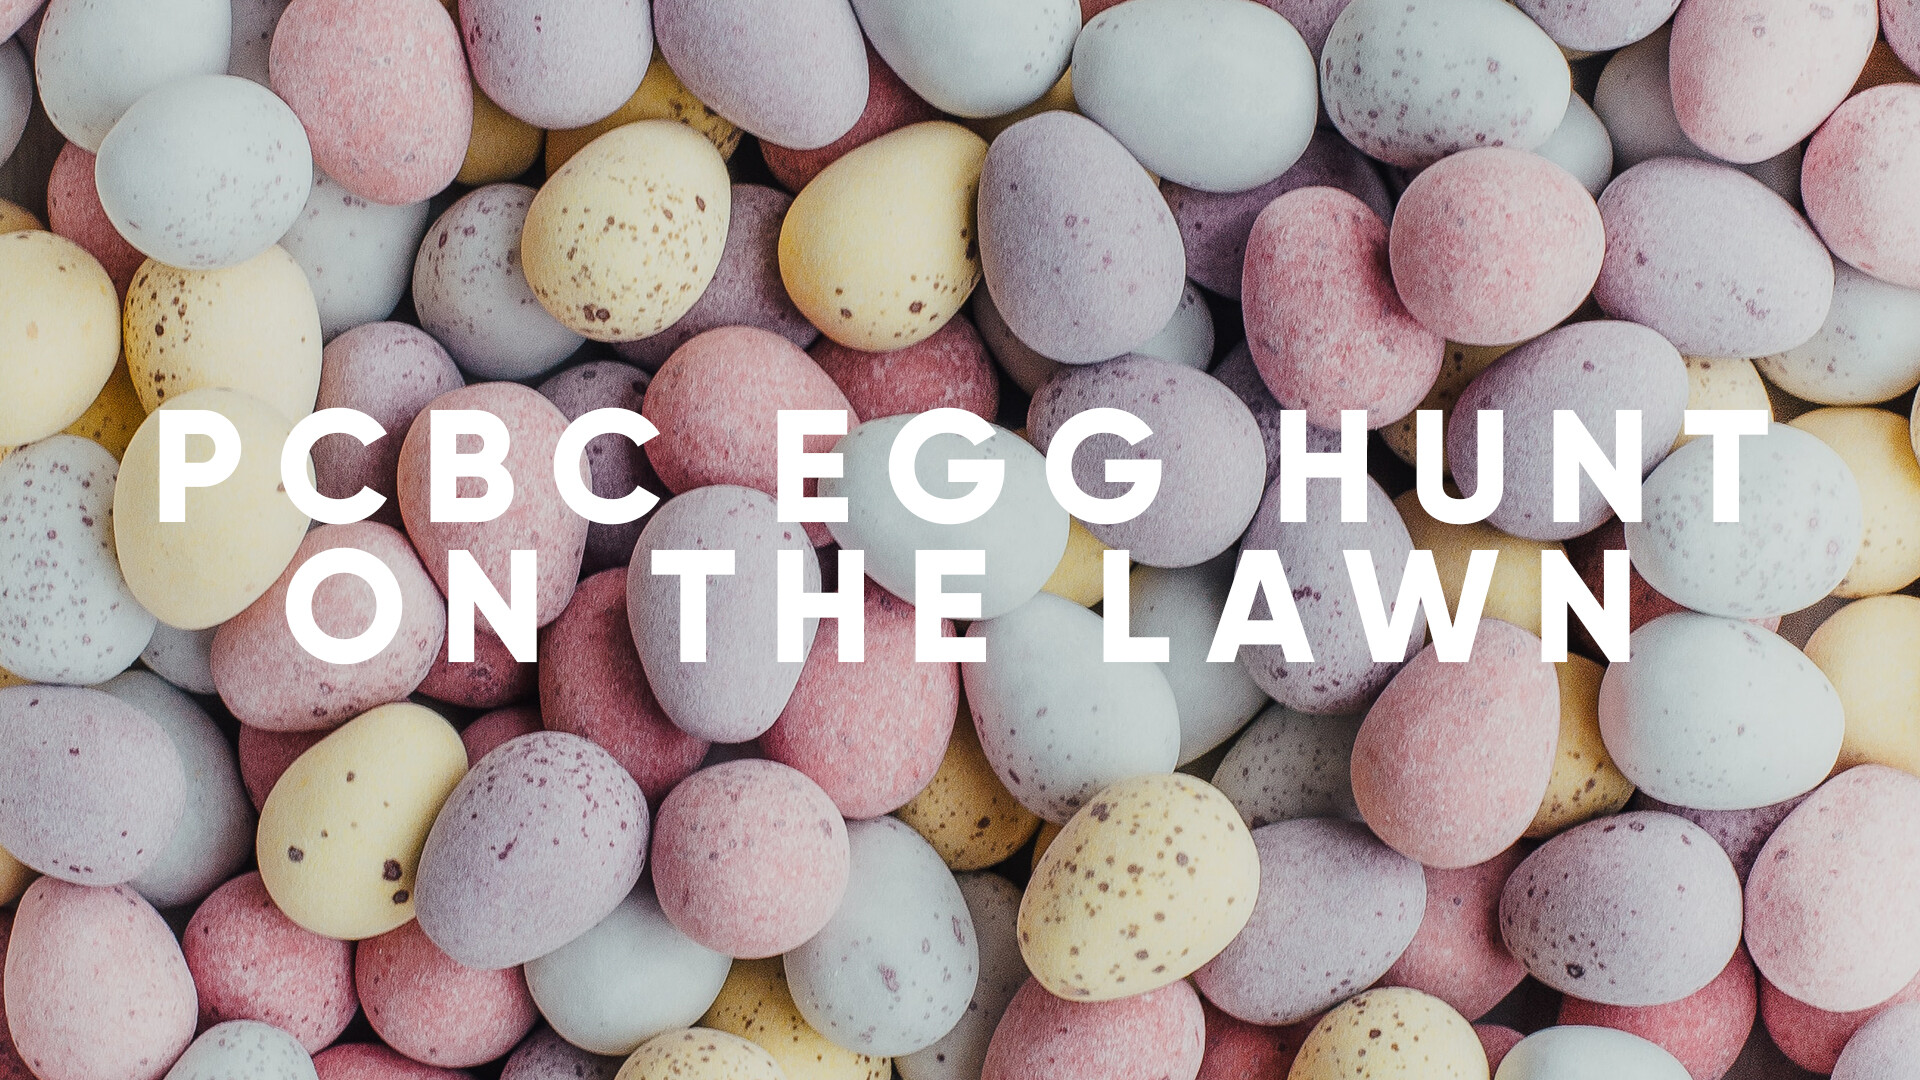 PCBC Egg Hunt on the Lawn